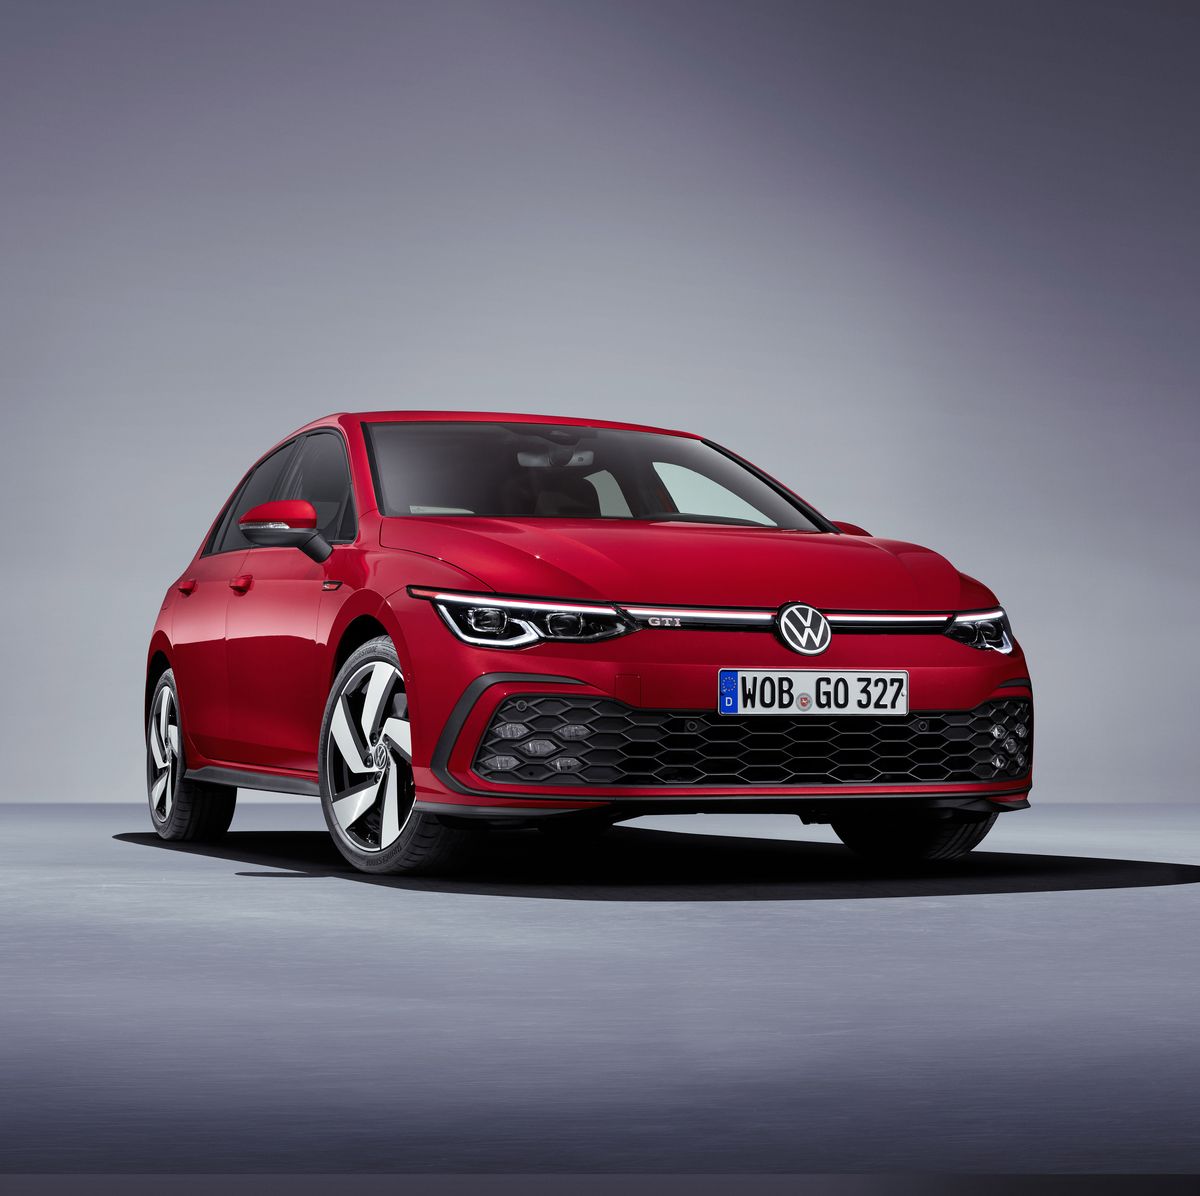 8th-Gen Volkswagen GTI: More Details and When We Can Expect It